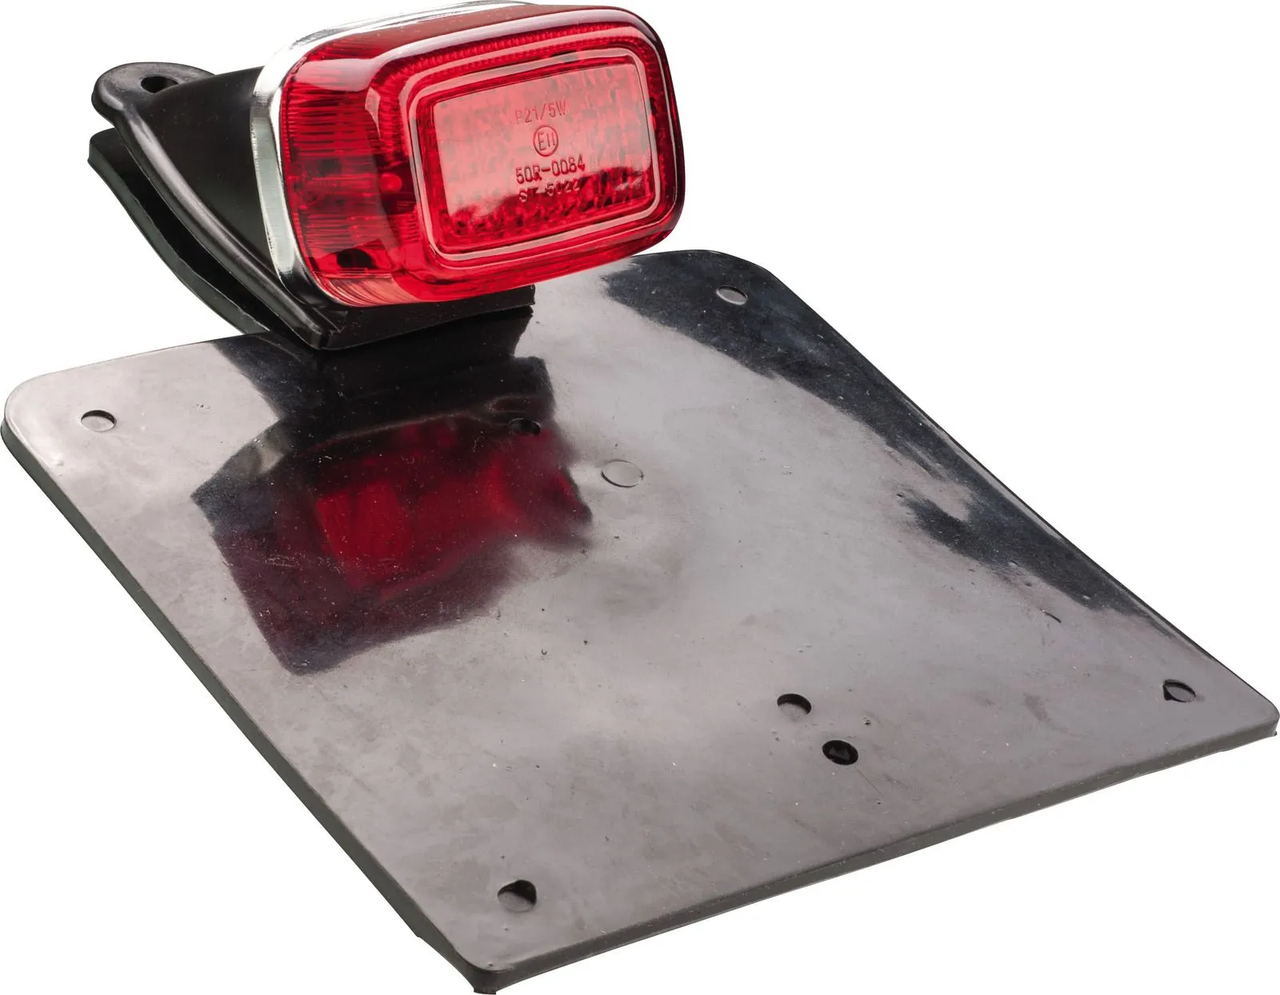 Mini-Taillight Kit 'GS' (E-marked), with inner reflector and 12V bulb 21/5W